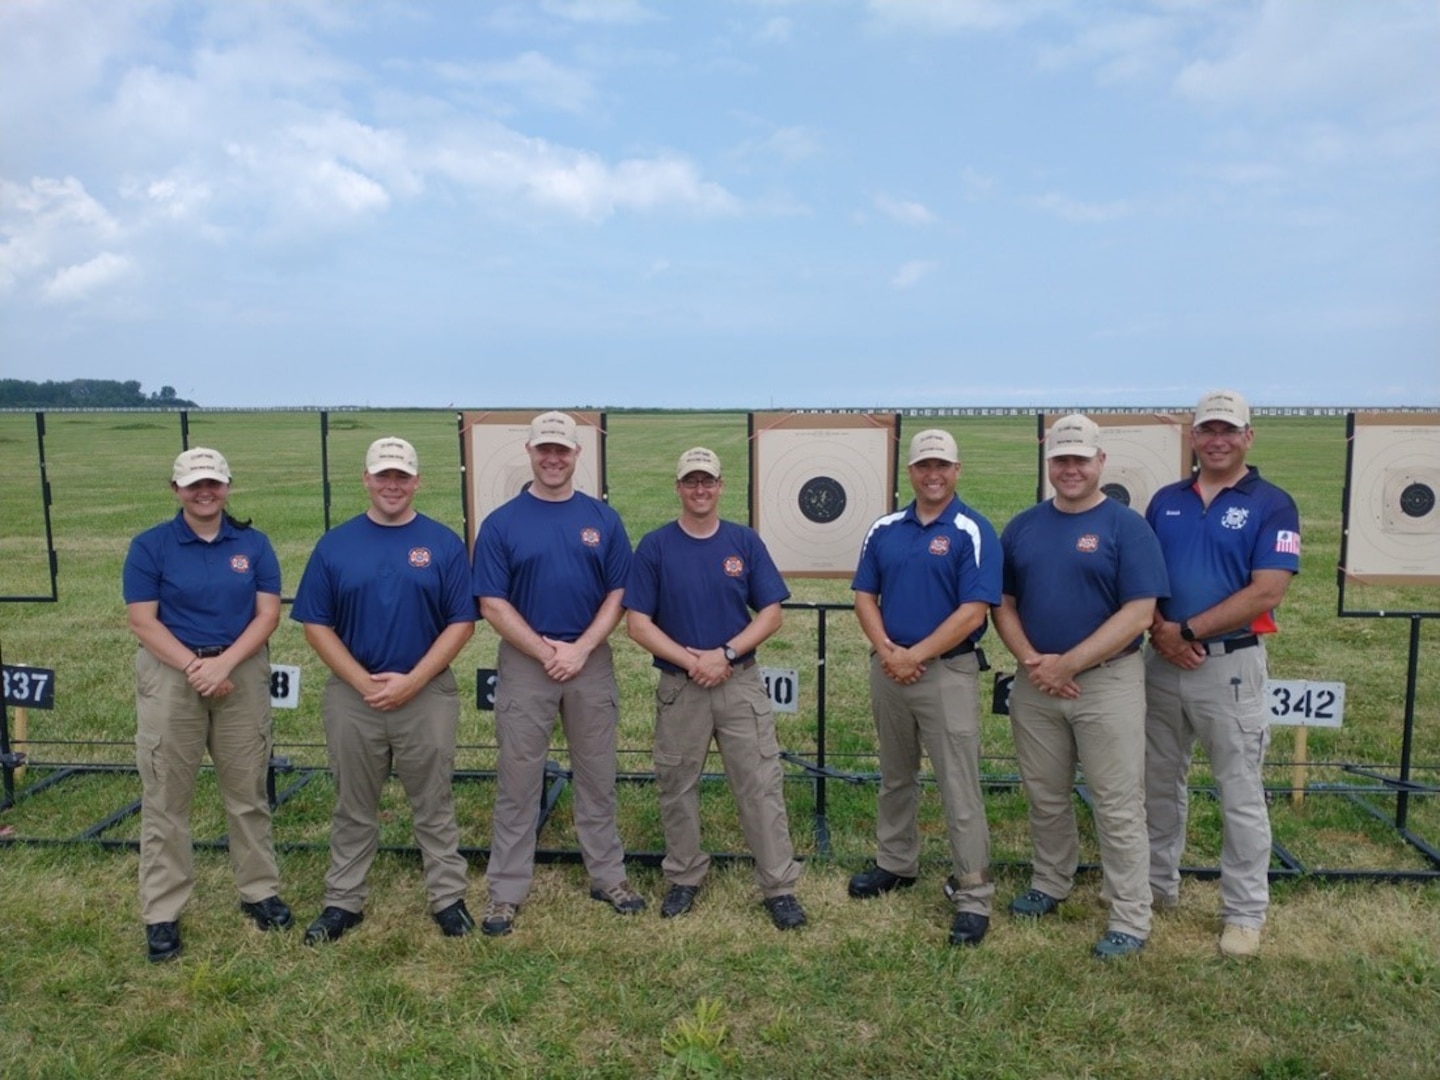 The Coast Guard’s Marksmanship Team poses for a photograph after competing in the National Trophy Pistol Match at the Civilian Marksmanship Program National Matches in Camp Perry, Ohio in July 2022. The team consisted of members all throughout the Coast Guard: (L to R) Petty Officer 3rd Class Christina MacMillan, Petty Officer 2nd Class Brent Craemer, Cmdr. Jonathan Welch, Chief Petty Officer Charlie Petrotto, Chief Petty Officer Mark Osborne, Capt. David Melton, Chief Petty Officer Wesley Koran.